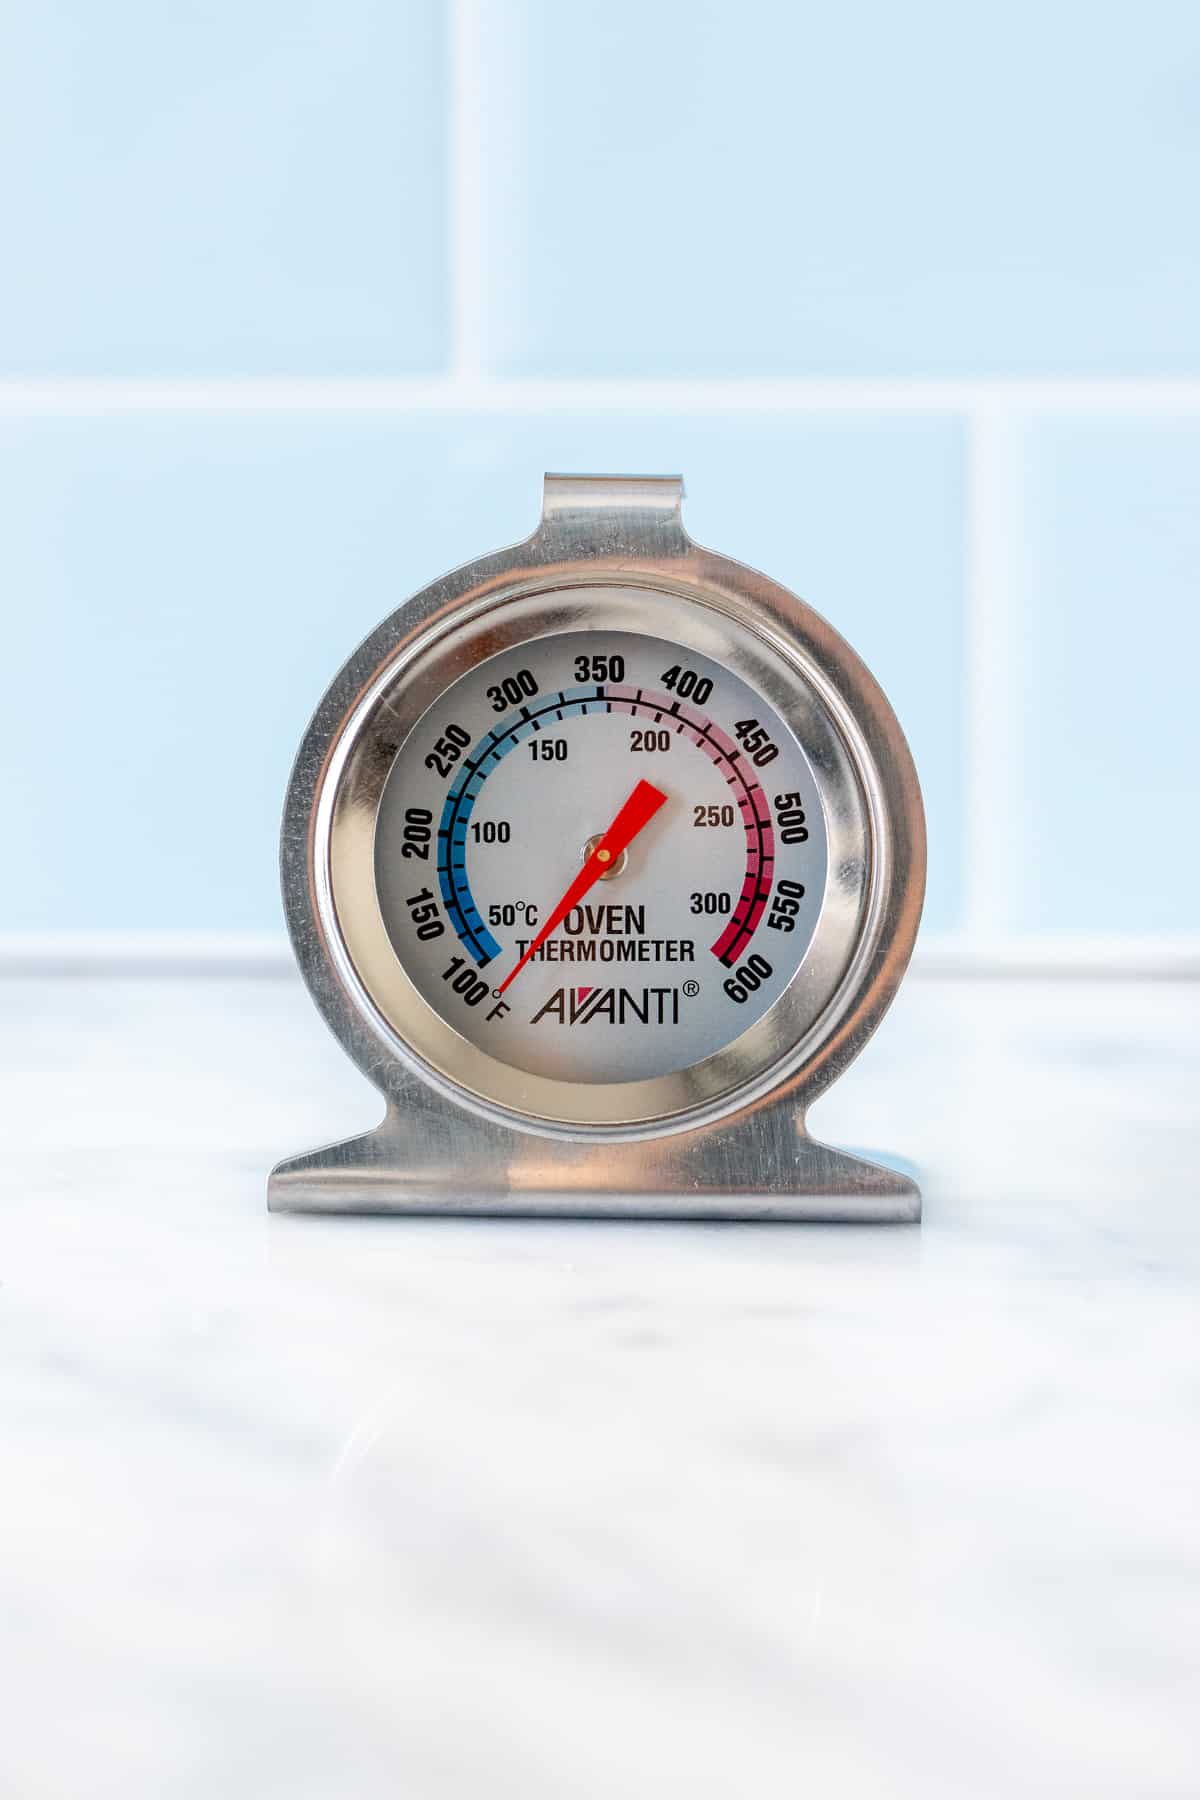 An oven thermometer on a kitchen counter